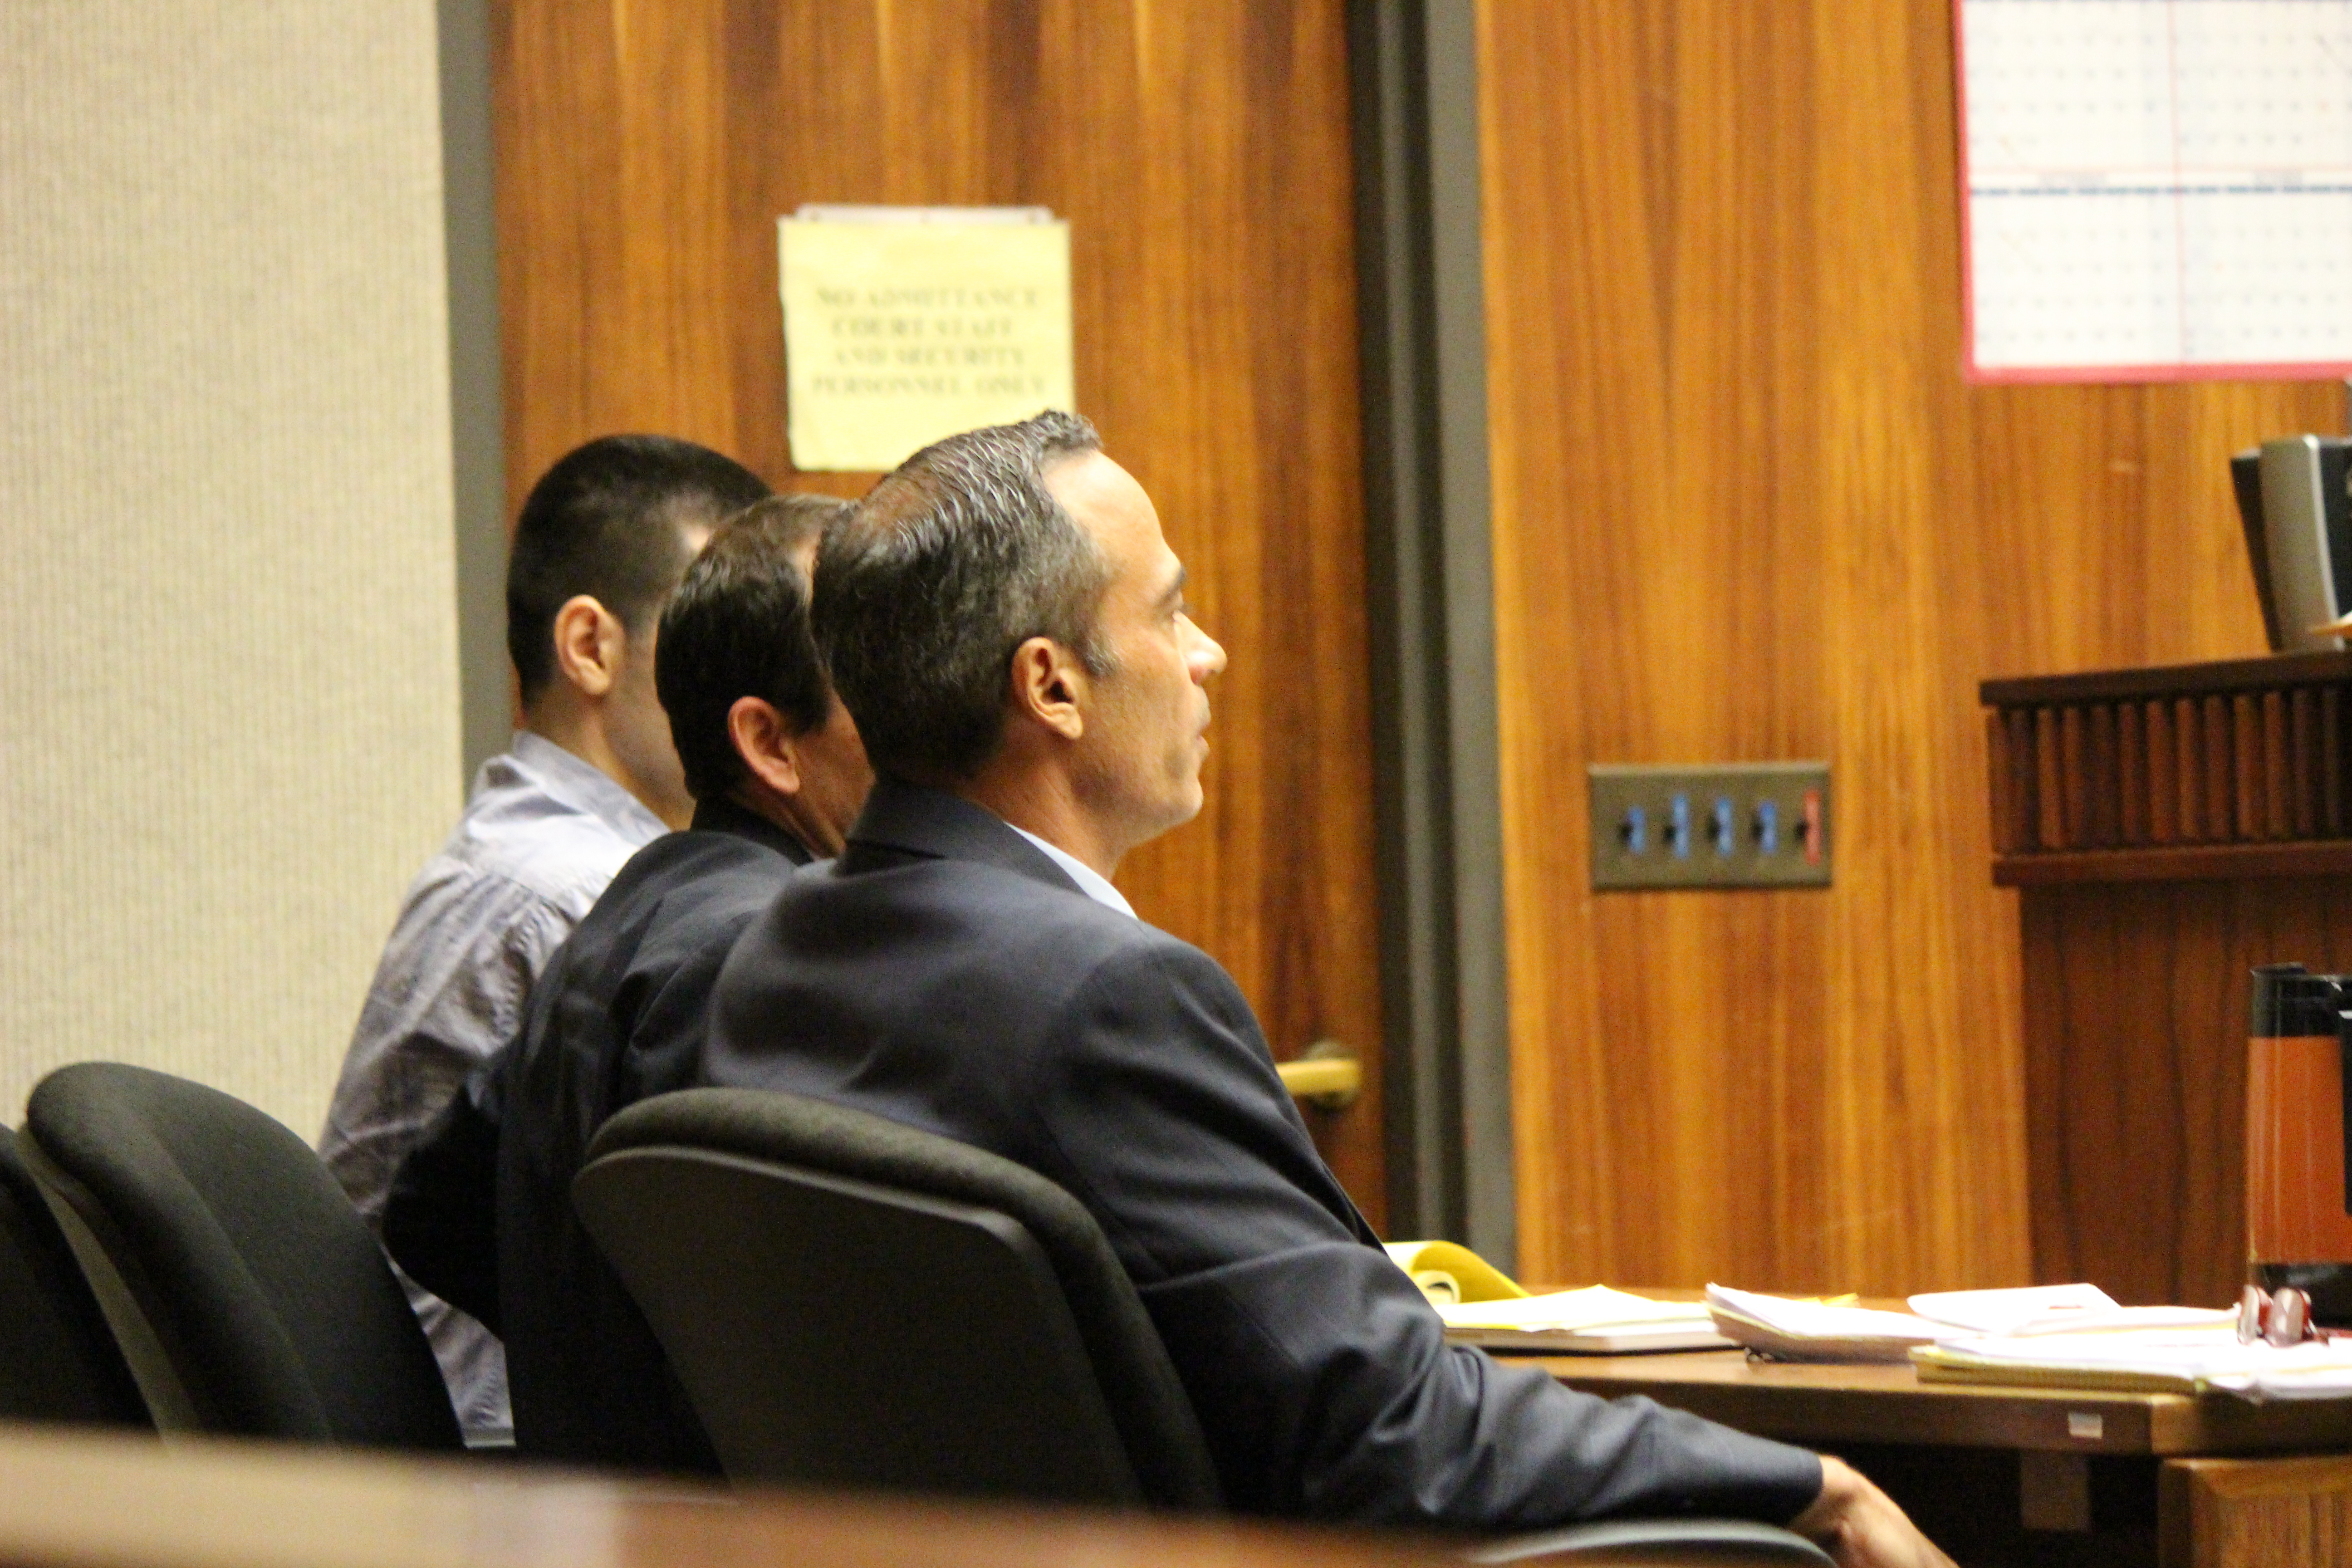 State v Capobianco trail. Defense Attorney Jon Apo in foreground (right) with fellow defense attorney Matthew Nardi (middle) and defendant Steven Capobianco (left) . PC: 11.30.16 by Wendy Osher.